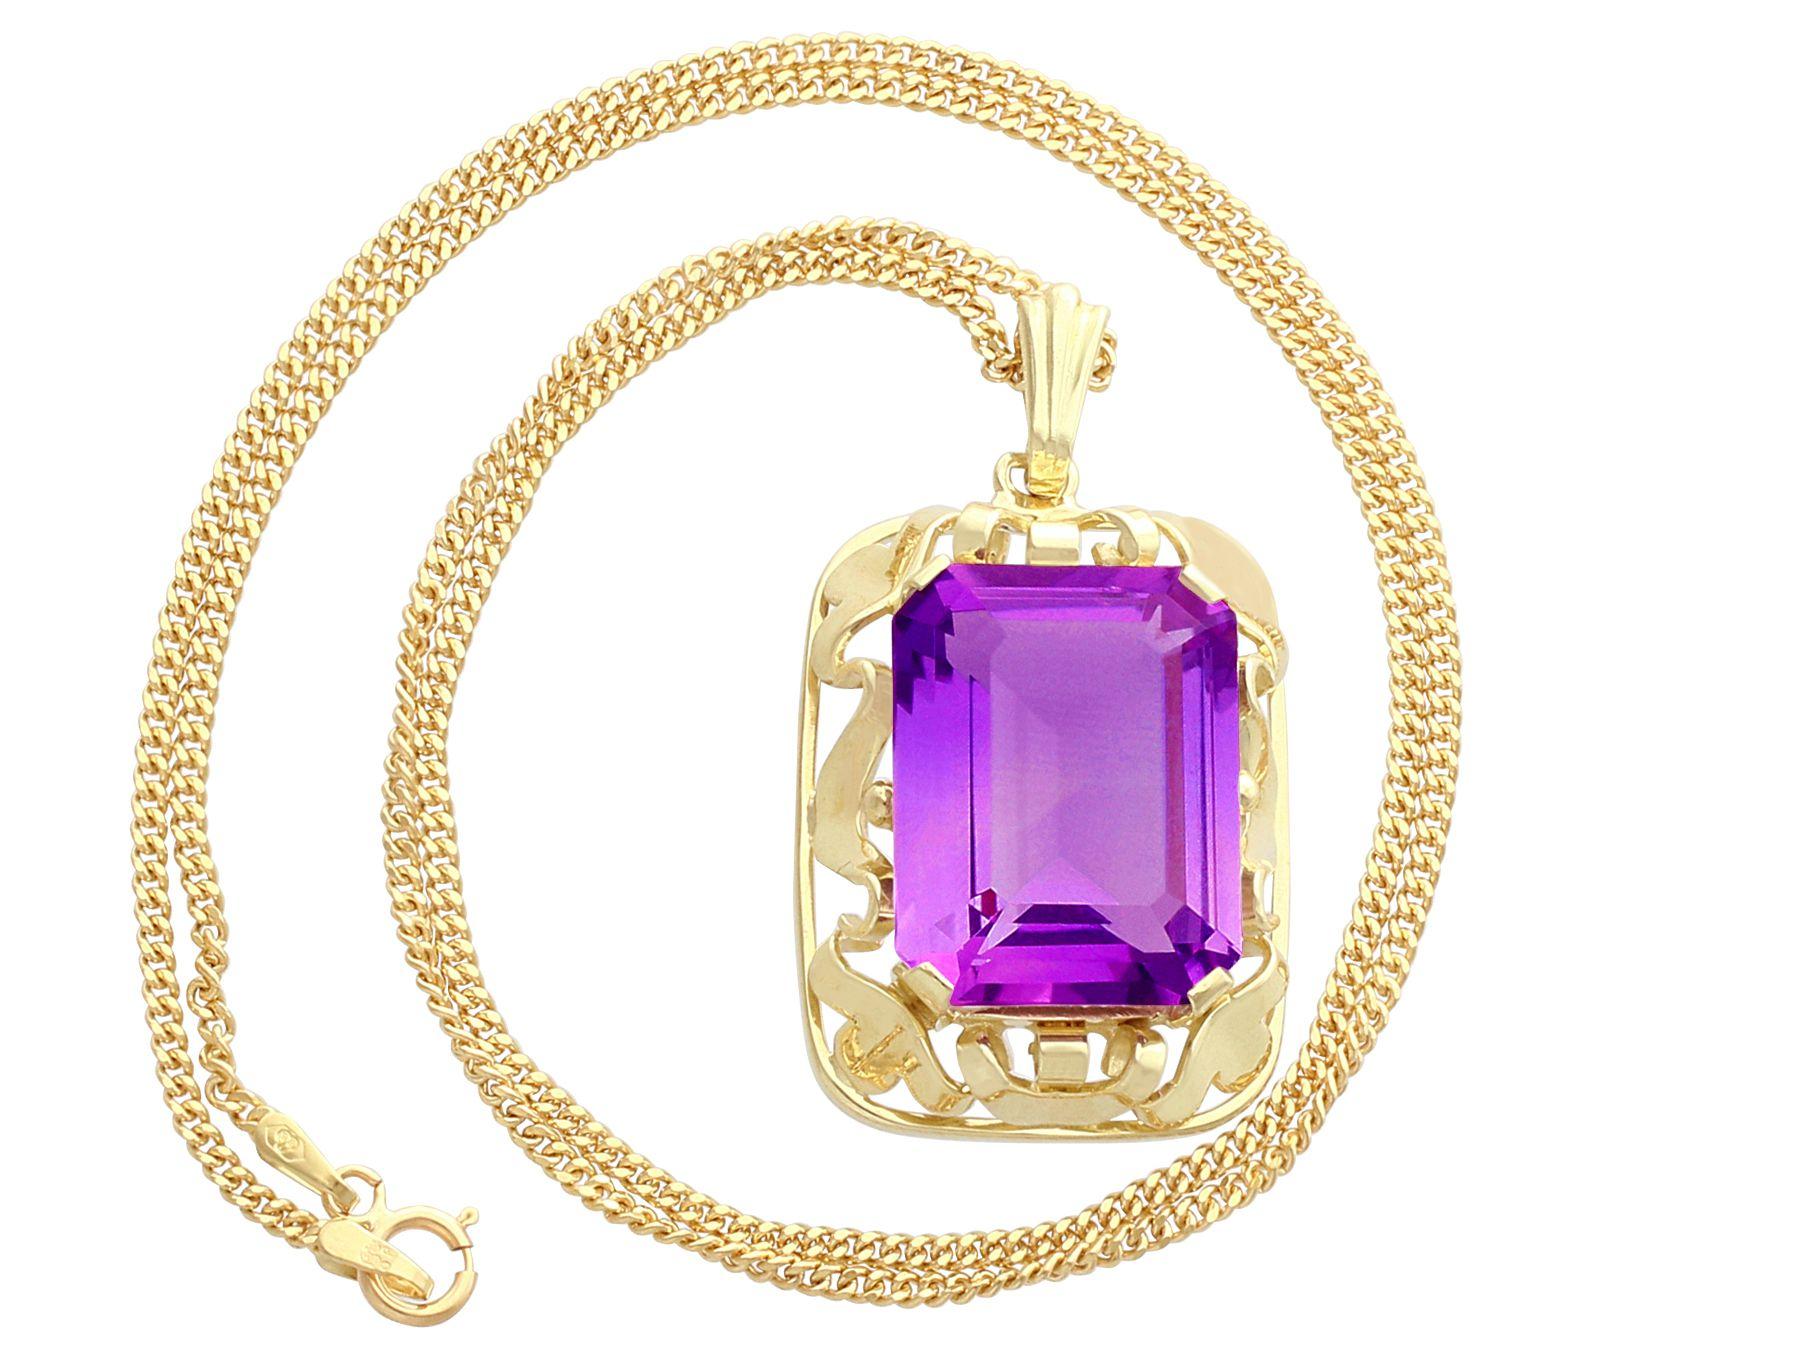 An impressive vintage European 15.41 carat amethyst and 14 karat yellow gold pendant; part of our diverse gemstone jewelry and estate jewelry collections.

This fine and impressive vintage amethyst pendant has been crafted in 14k yellow gold.

The